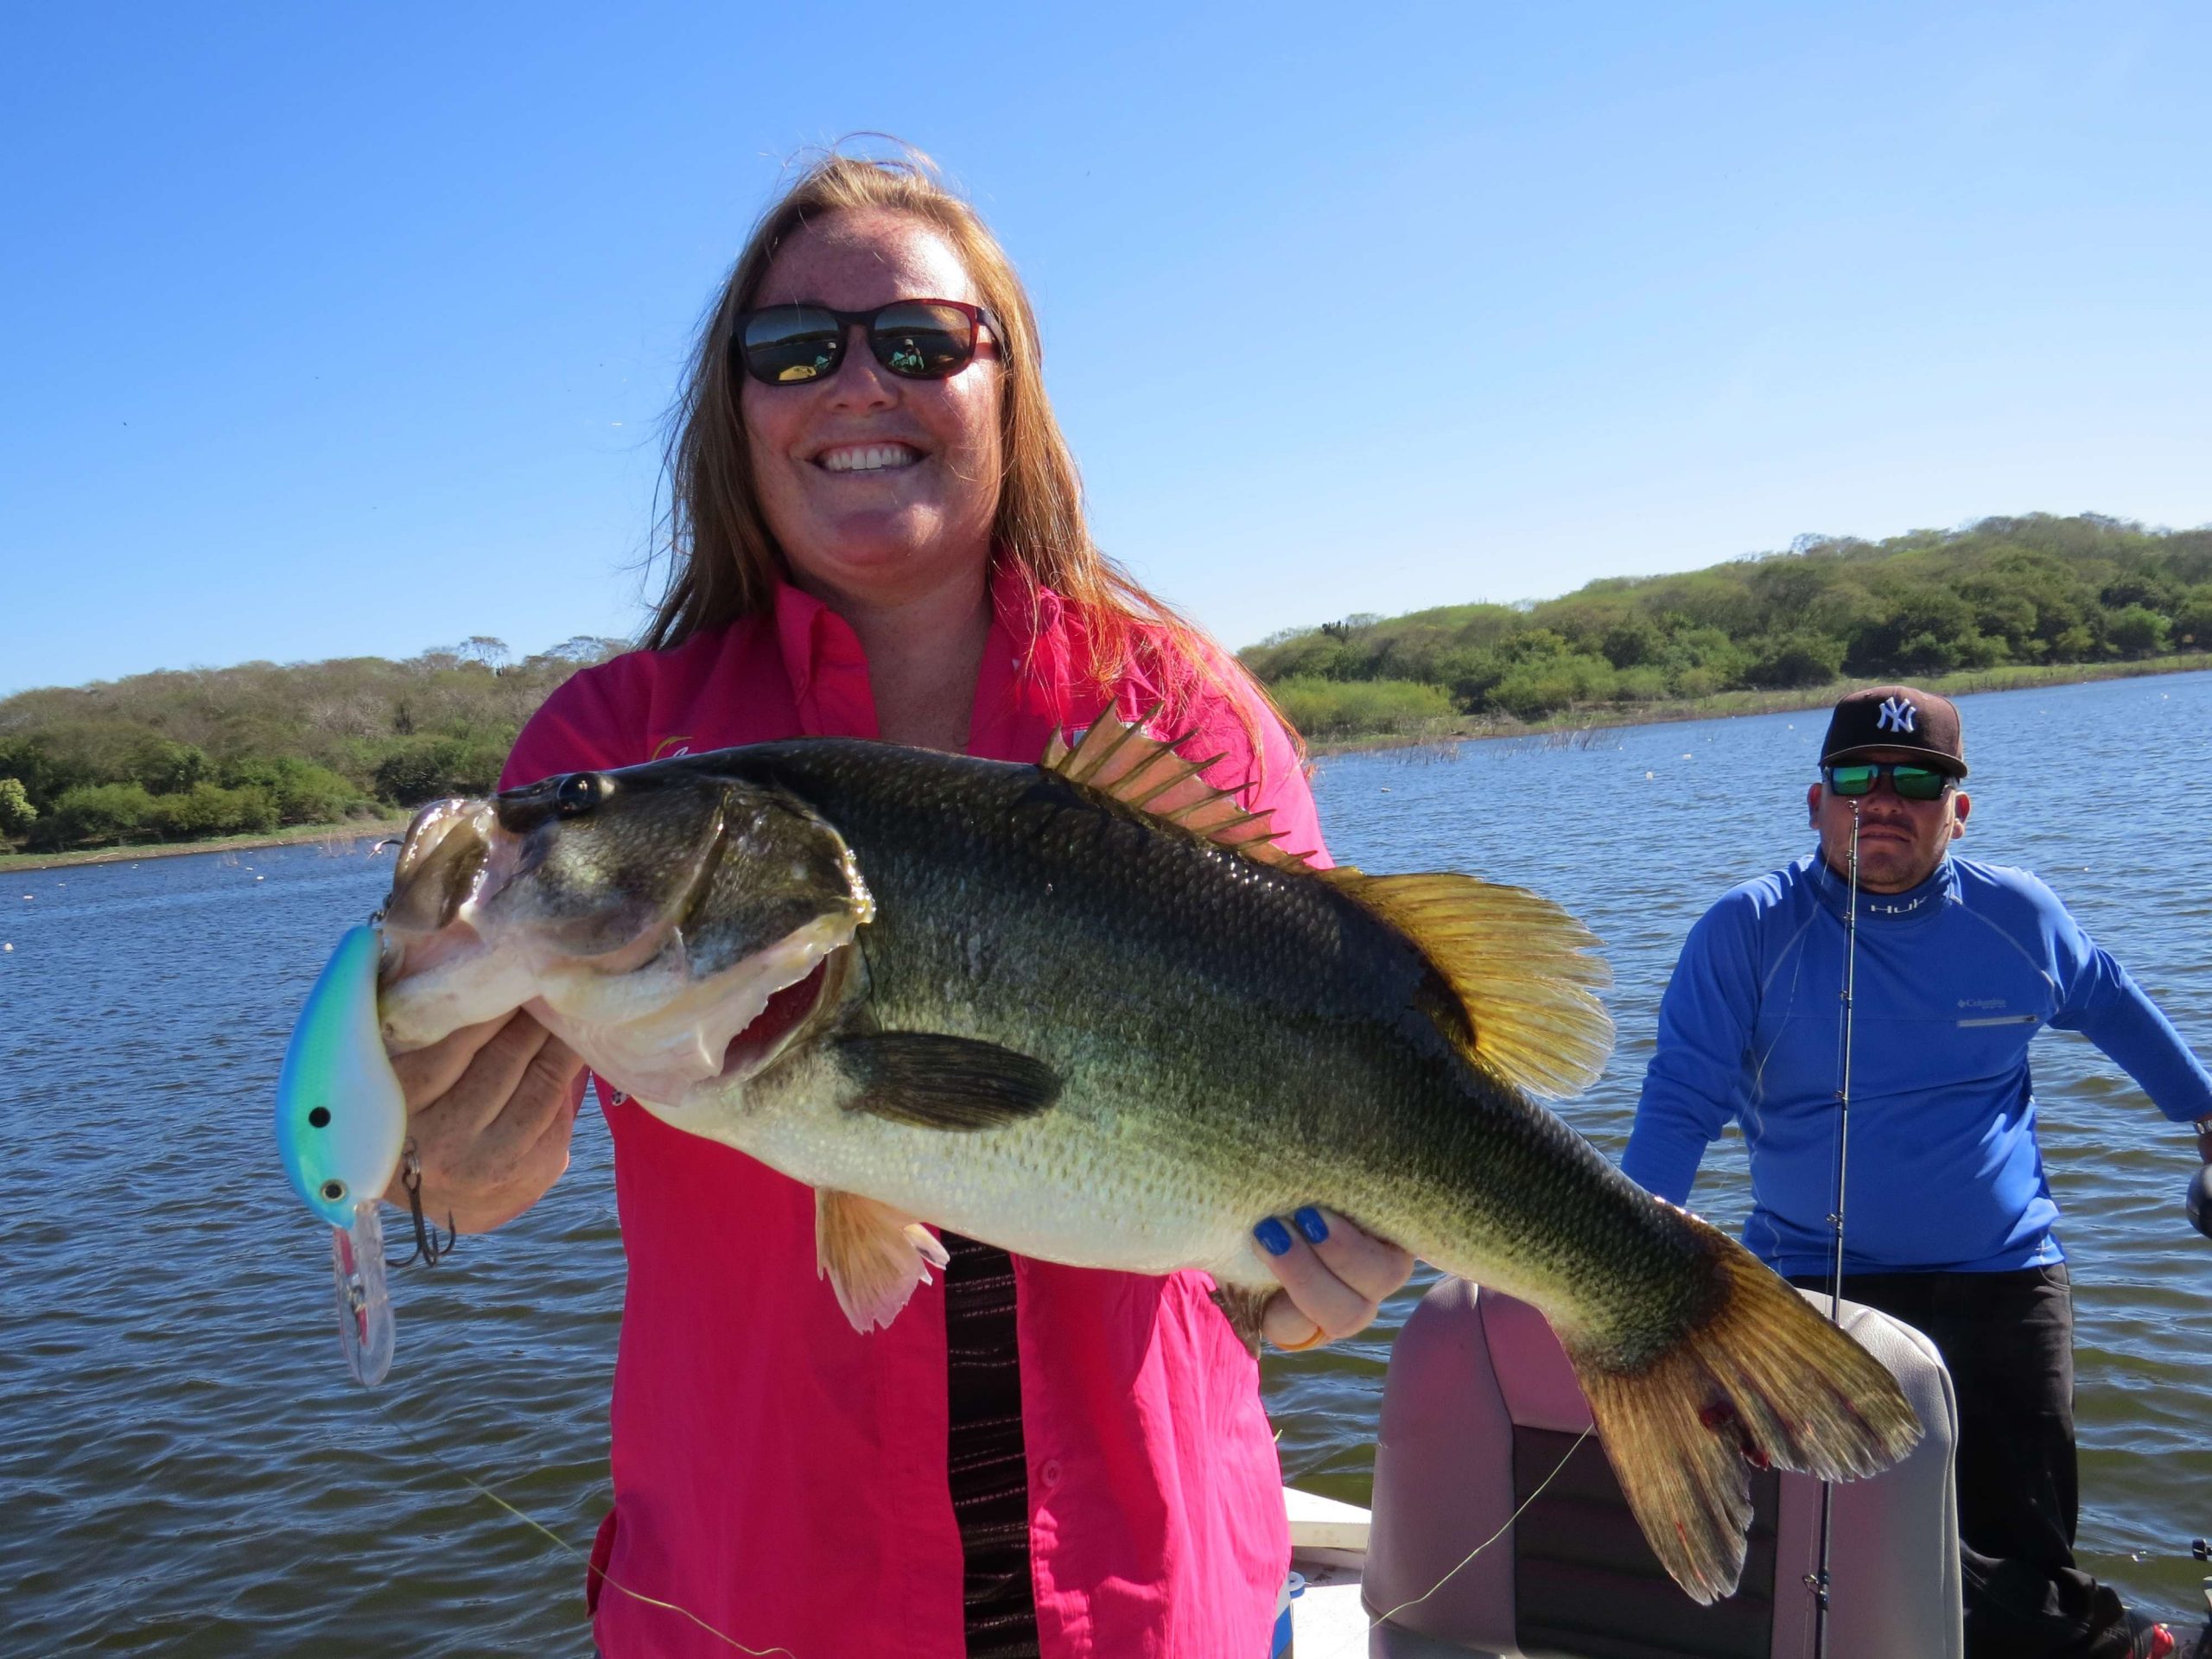 Hanna Robbins with her first fish on the big Strike King 10XD crankbait.